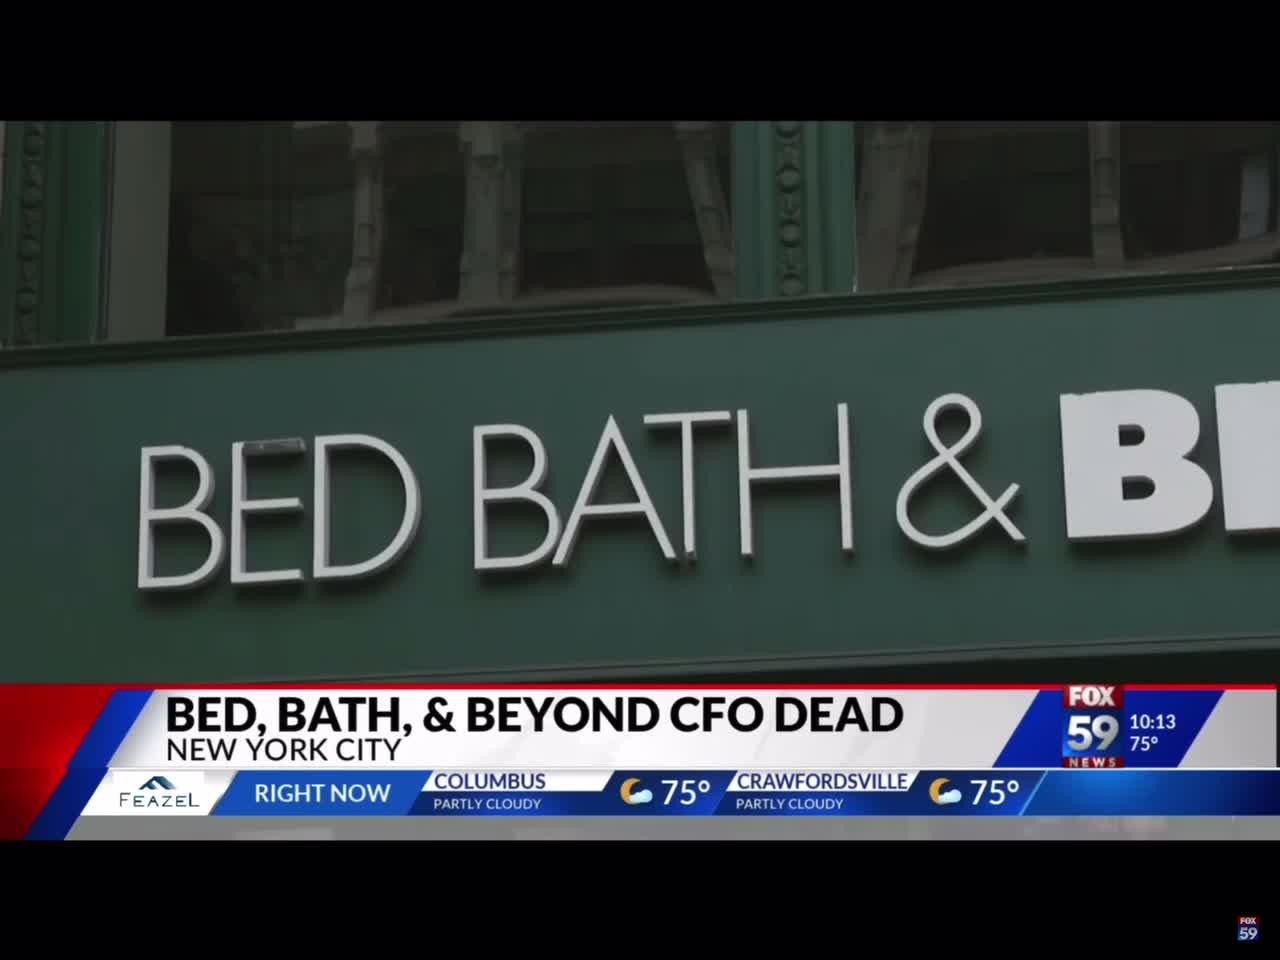 Bed Bath & Beyond CFO Gustavo Arnal committed suicide by jumping from an 18th floor balcony in NYC